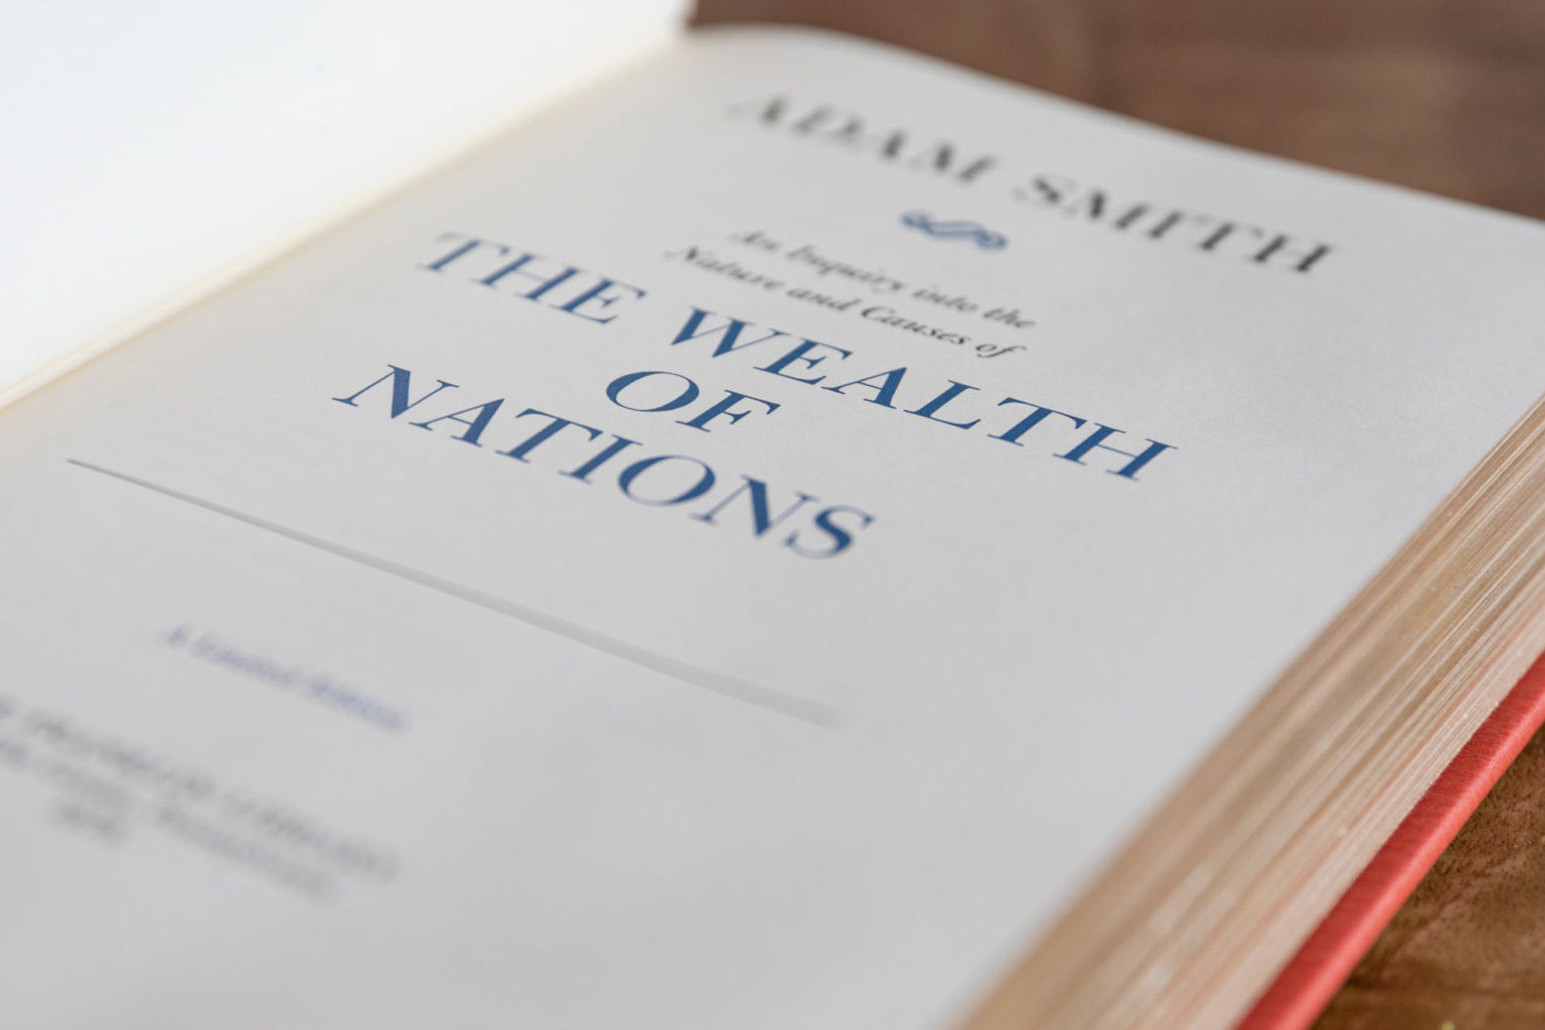 The Wealth of Nations by Adam Smith cover photographed. The cover was a profile of Adam Smith and the title The Wealth of Nations.